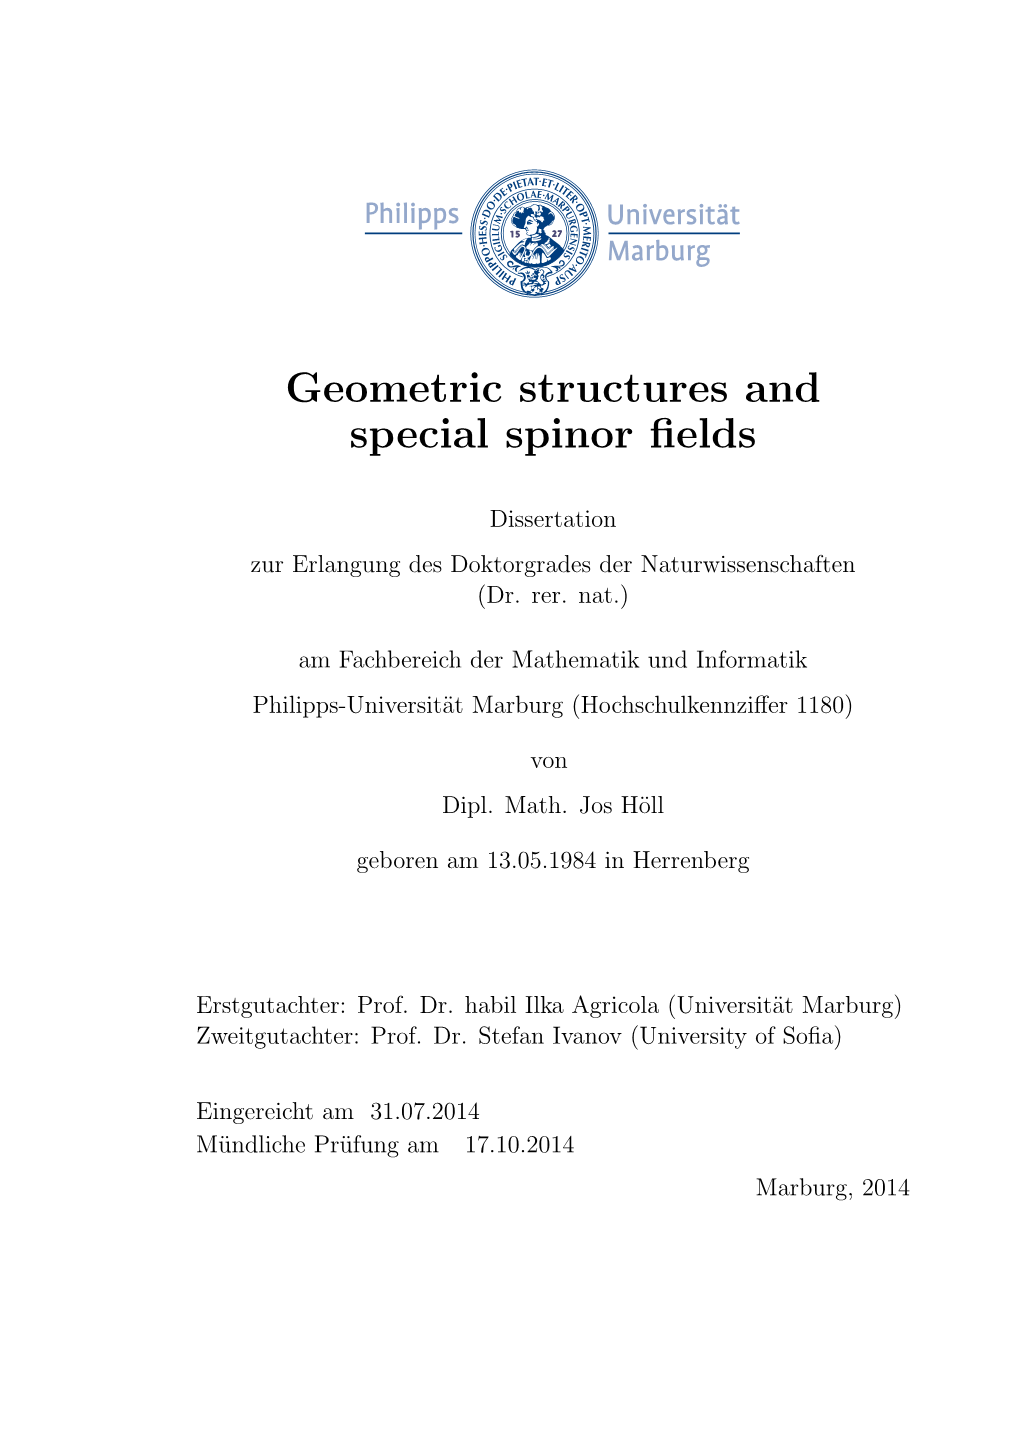 Geometric Structures and Special Spinor Fields